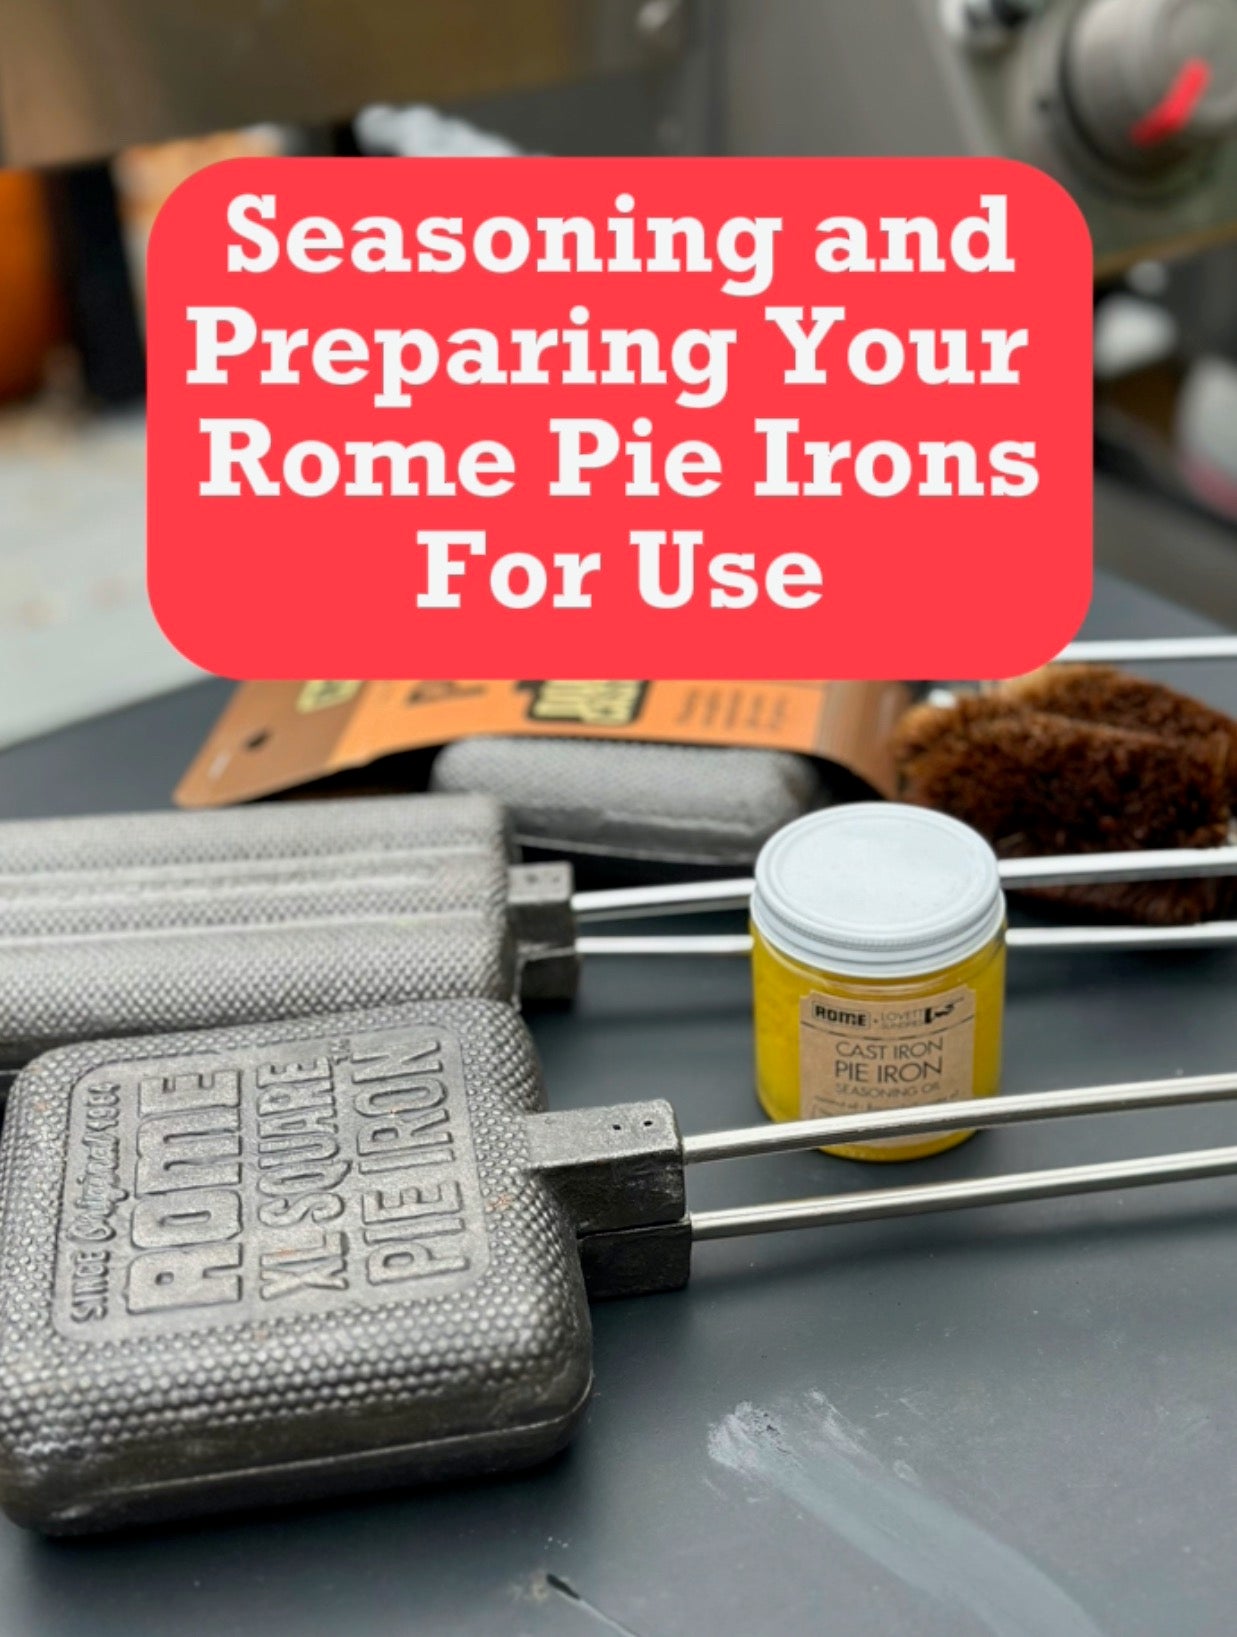 How To Season and Prepare Your Rome Pie Iron